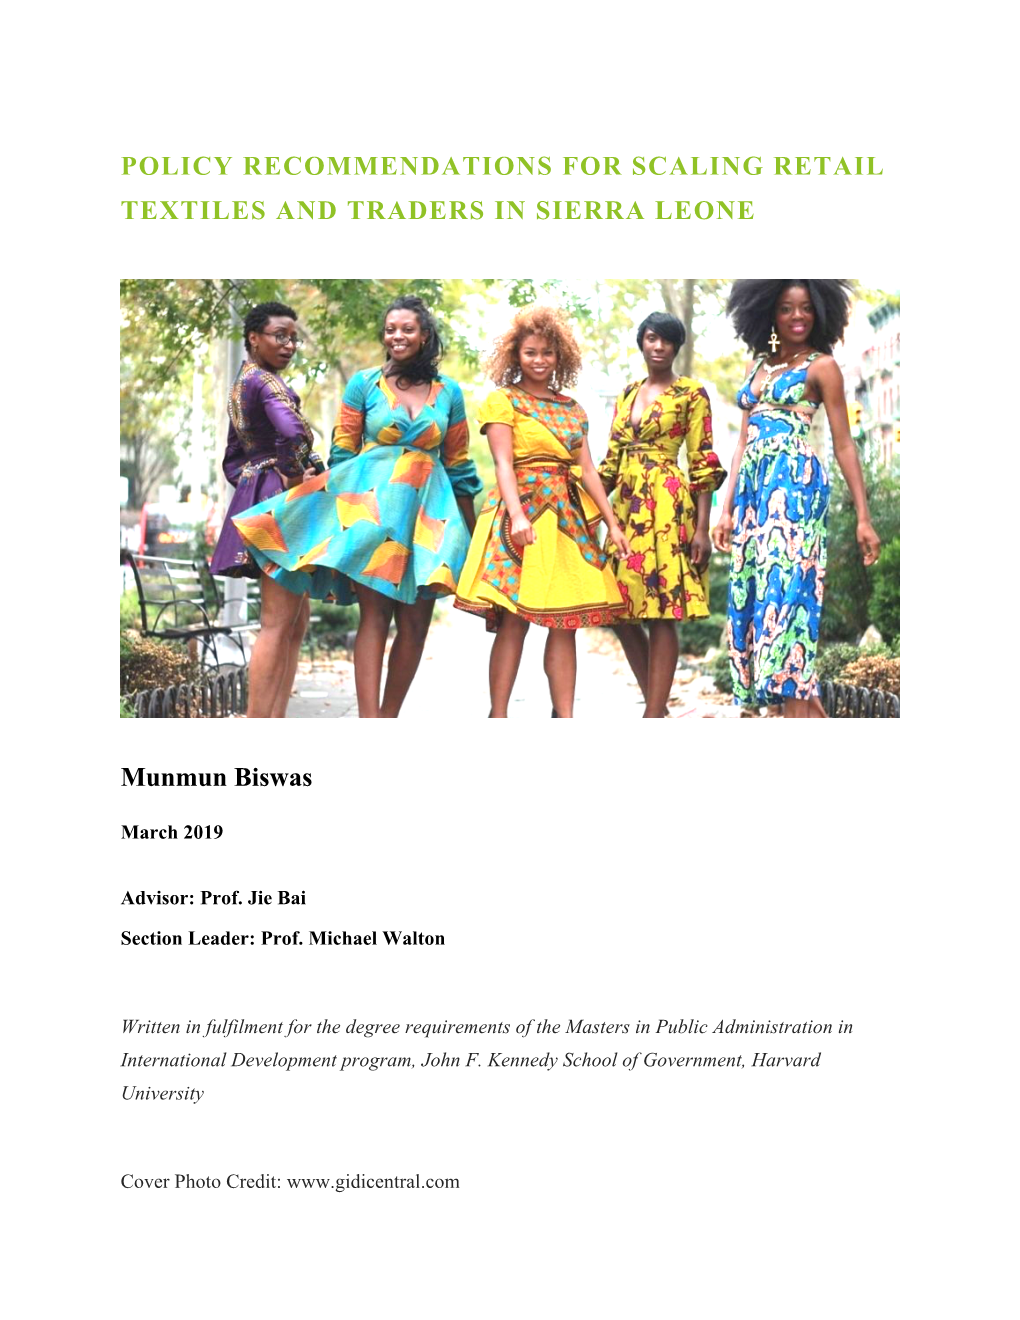 Policy Recommendations for Scaling Retail Textiles and Traders in Sierra Leone